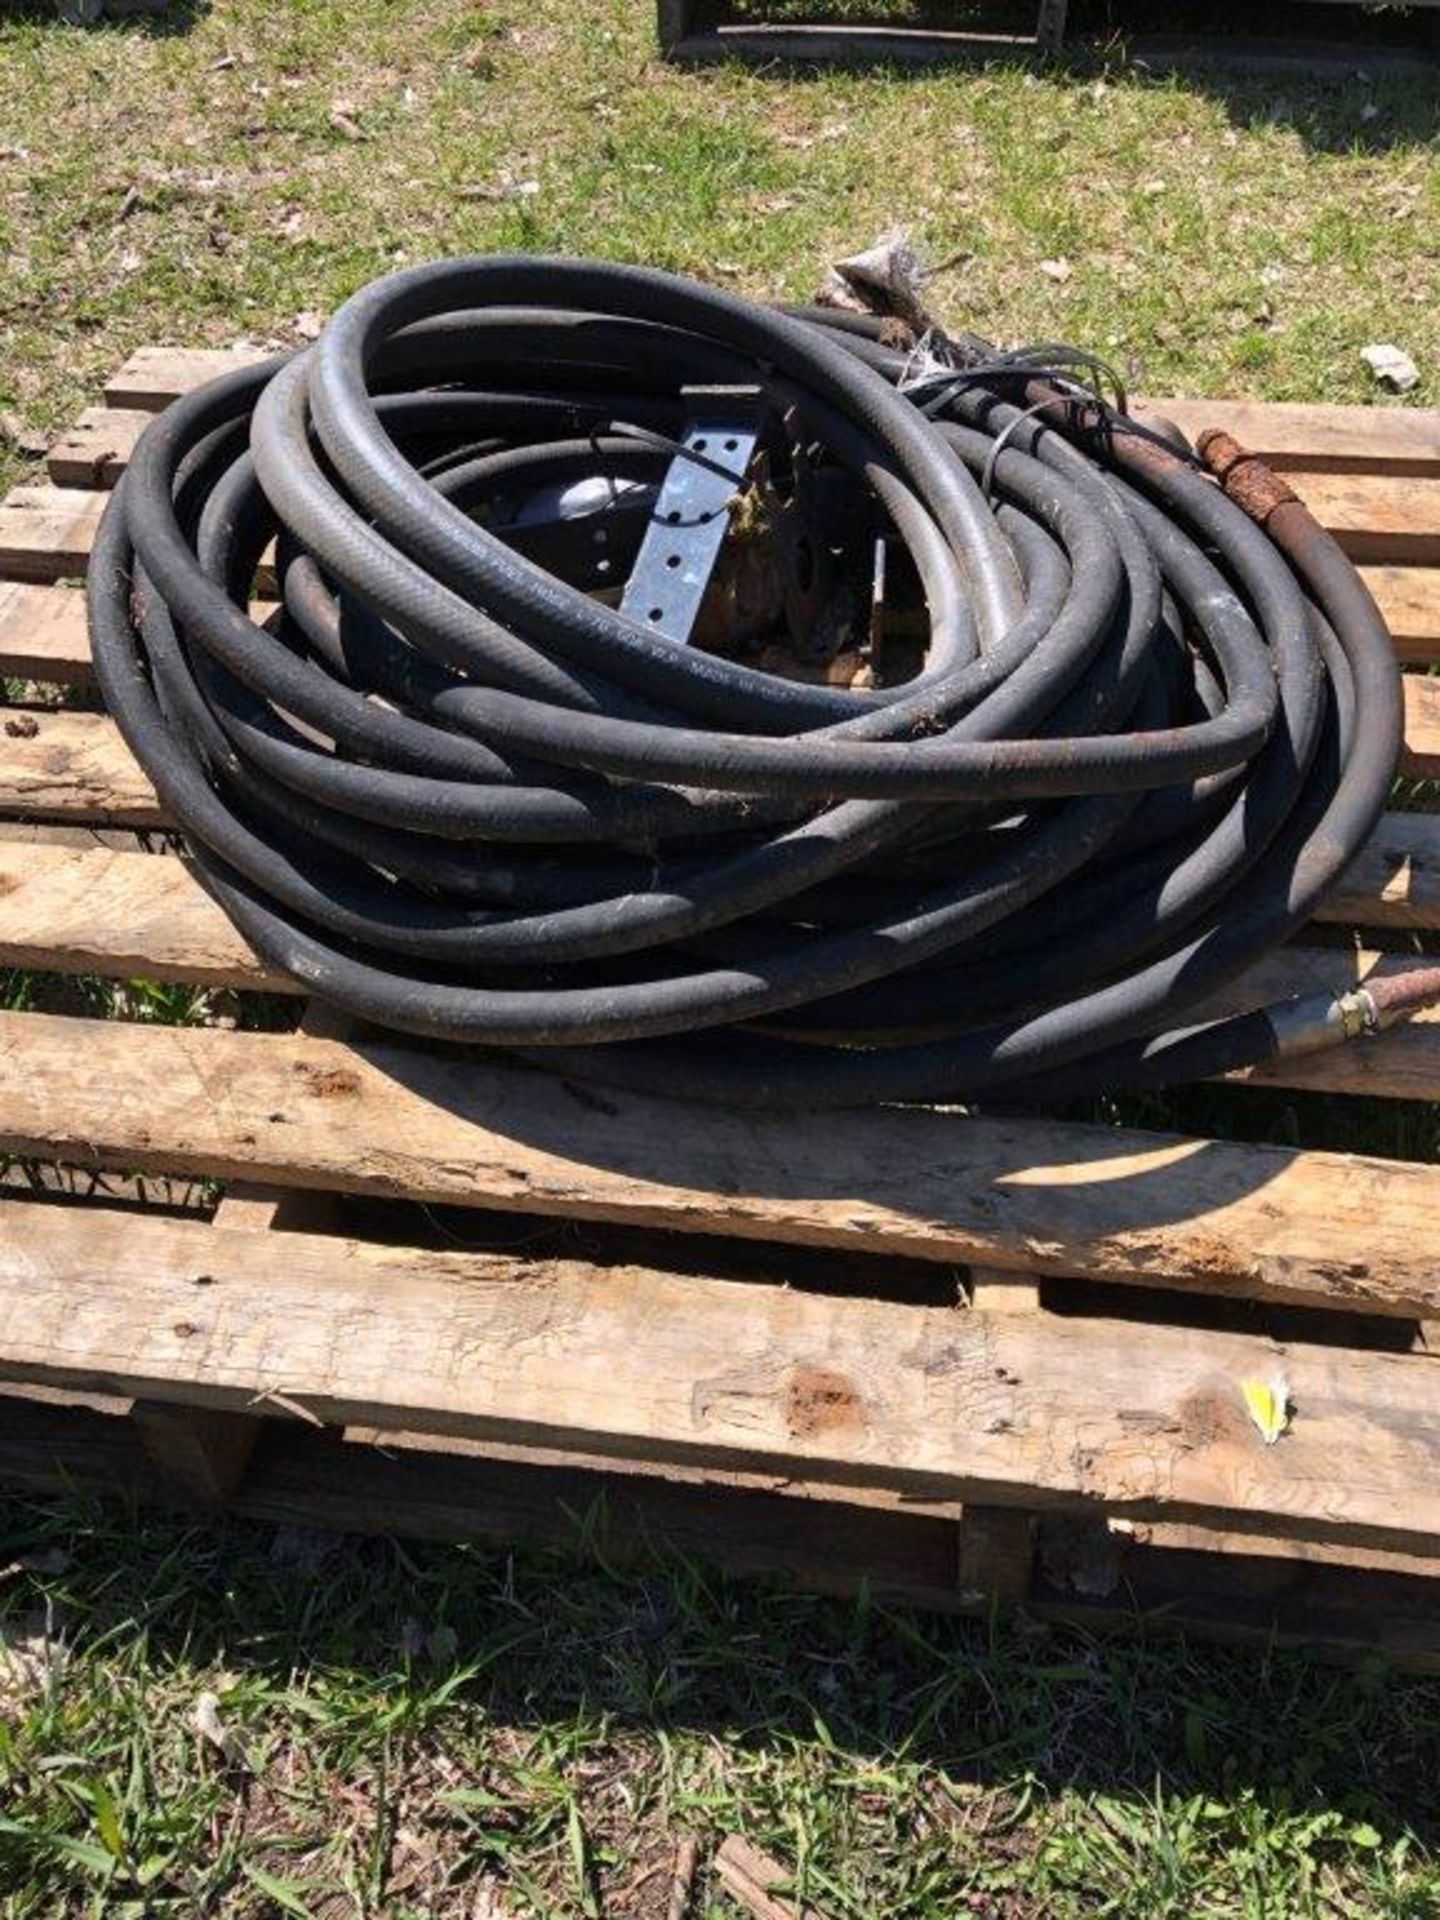 L/O ASSORTED HYD. HOSE W/ QUICK CONNECT FITTINGS